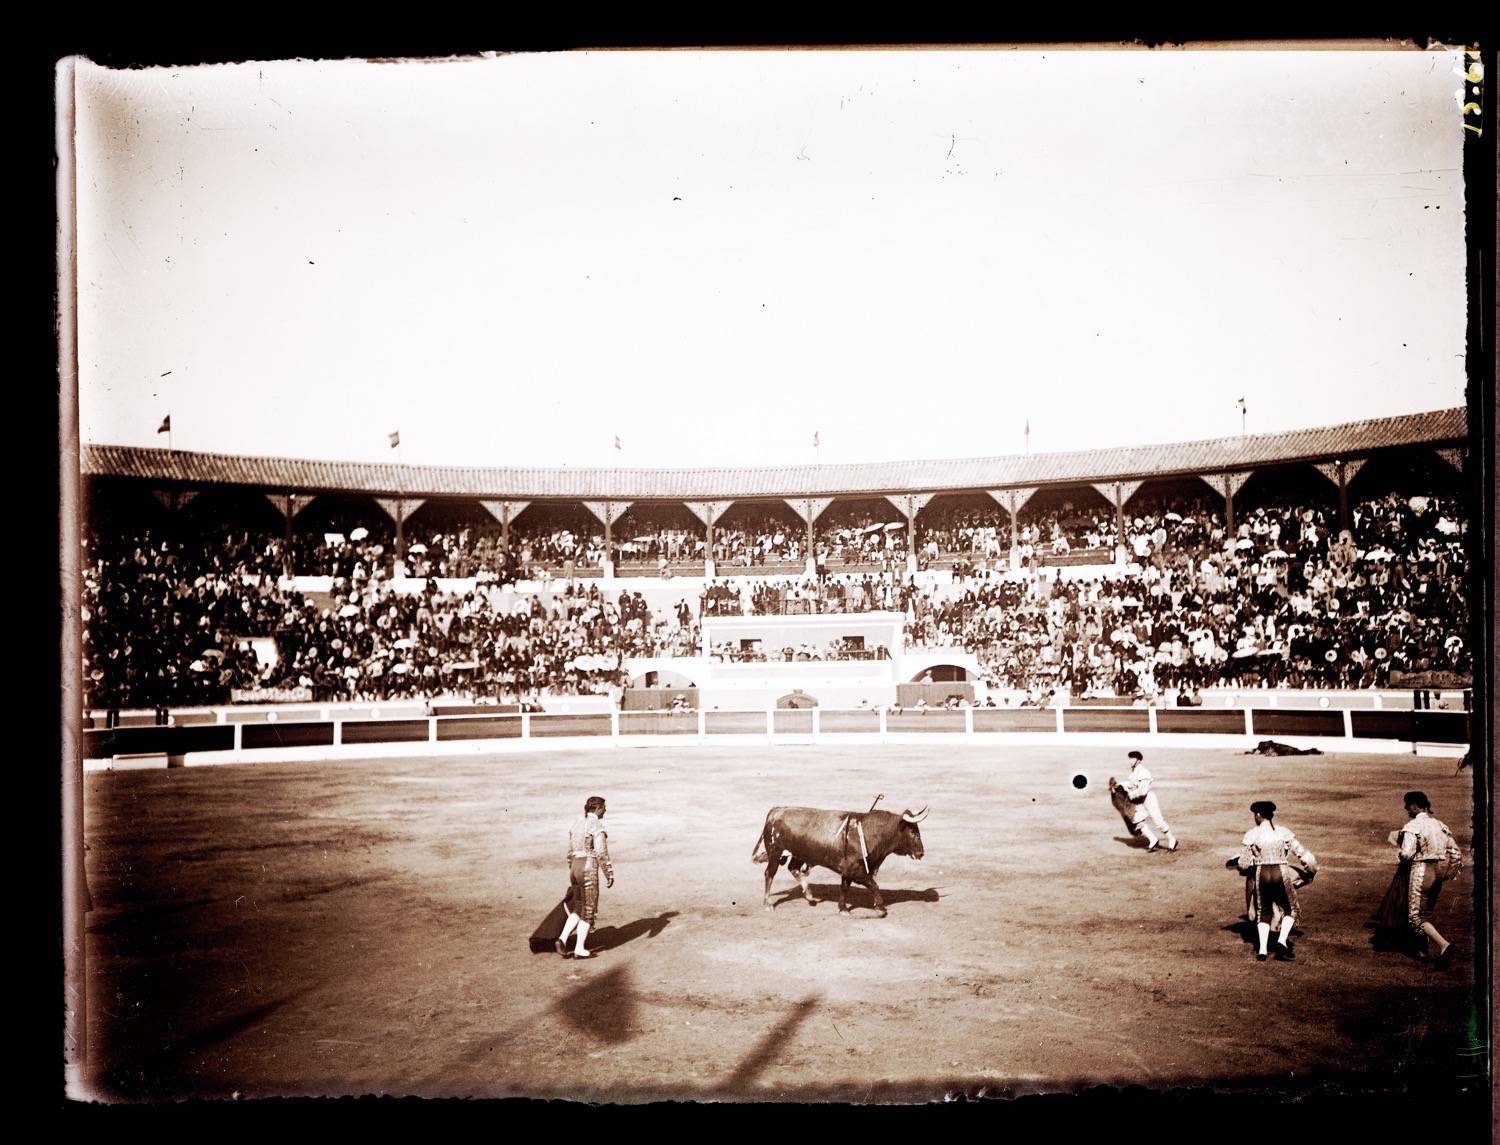 Matadors in the bullfight ring, viewed from the seating